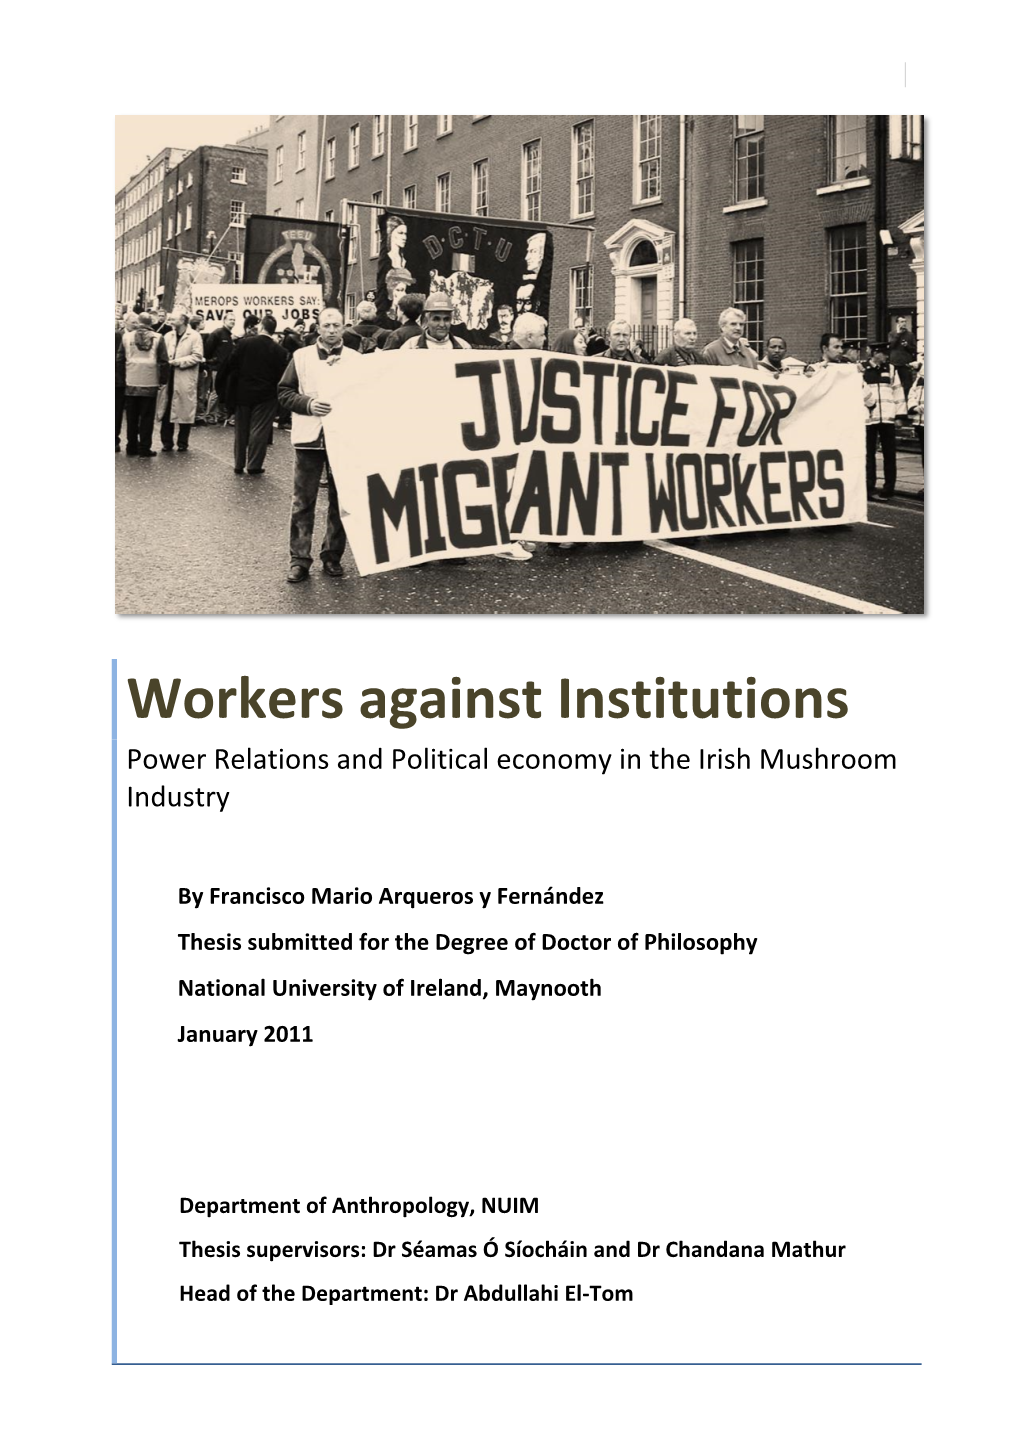 Workers Against Institutions Power Relations and Political Economy in the Irish Mushroom Industry